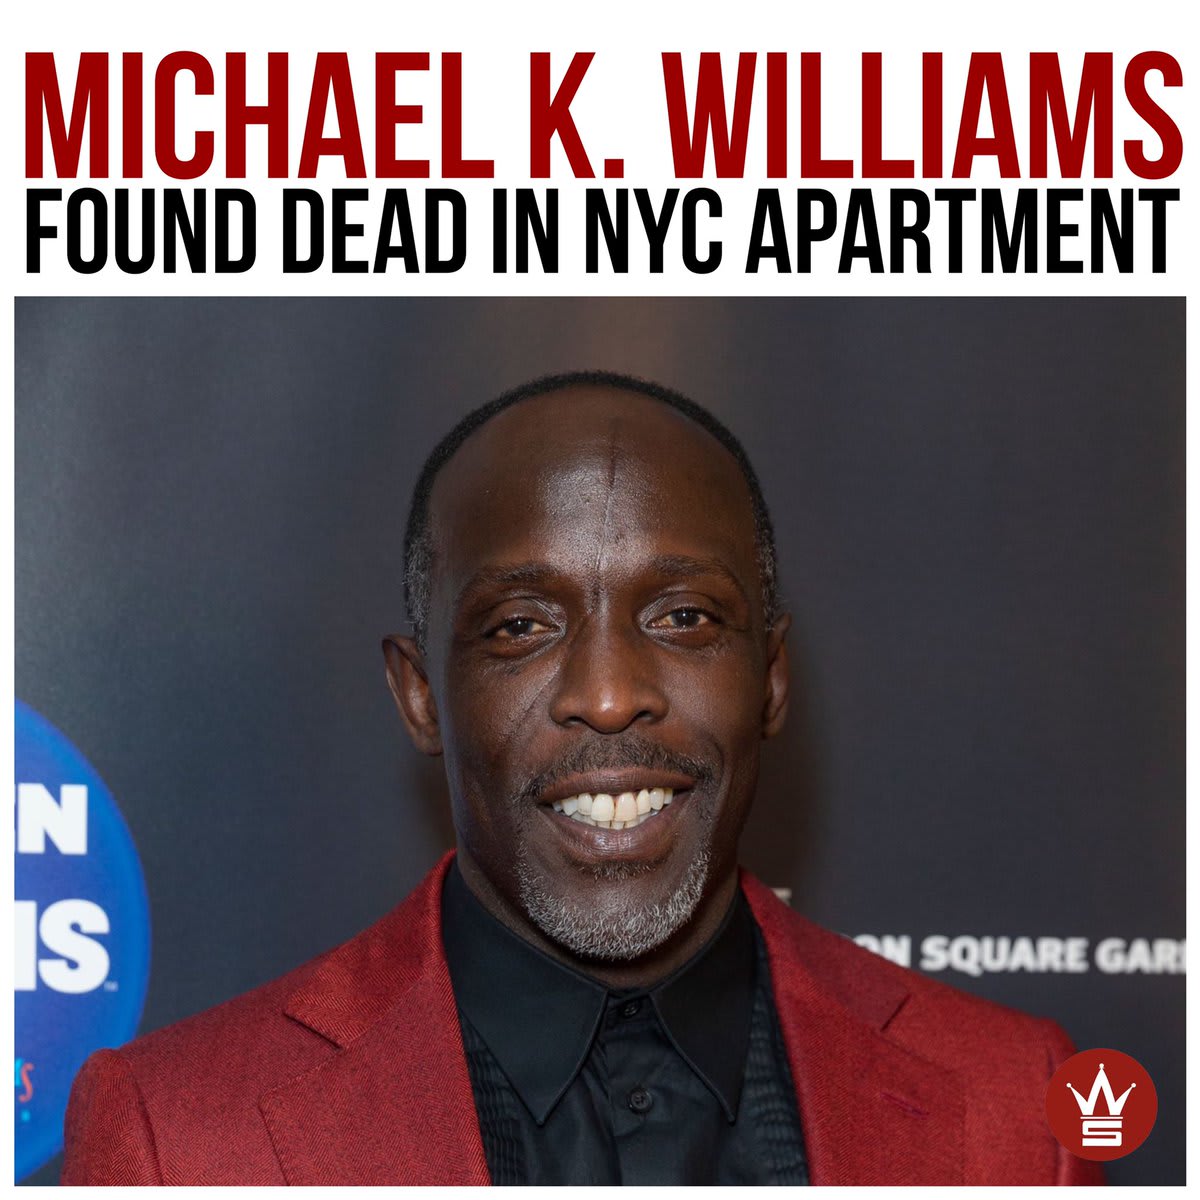 According to reports, Actor Michael K. Williams, known for playing Omar in “The Wire”, has been found dead of a suspected drug overdose in his Brooklyn apartment earlier today. Our thoughts and prayers are with his family friends. RIPMichaelKWilliams 🙏